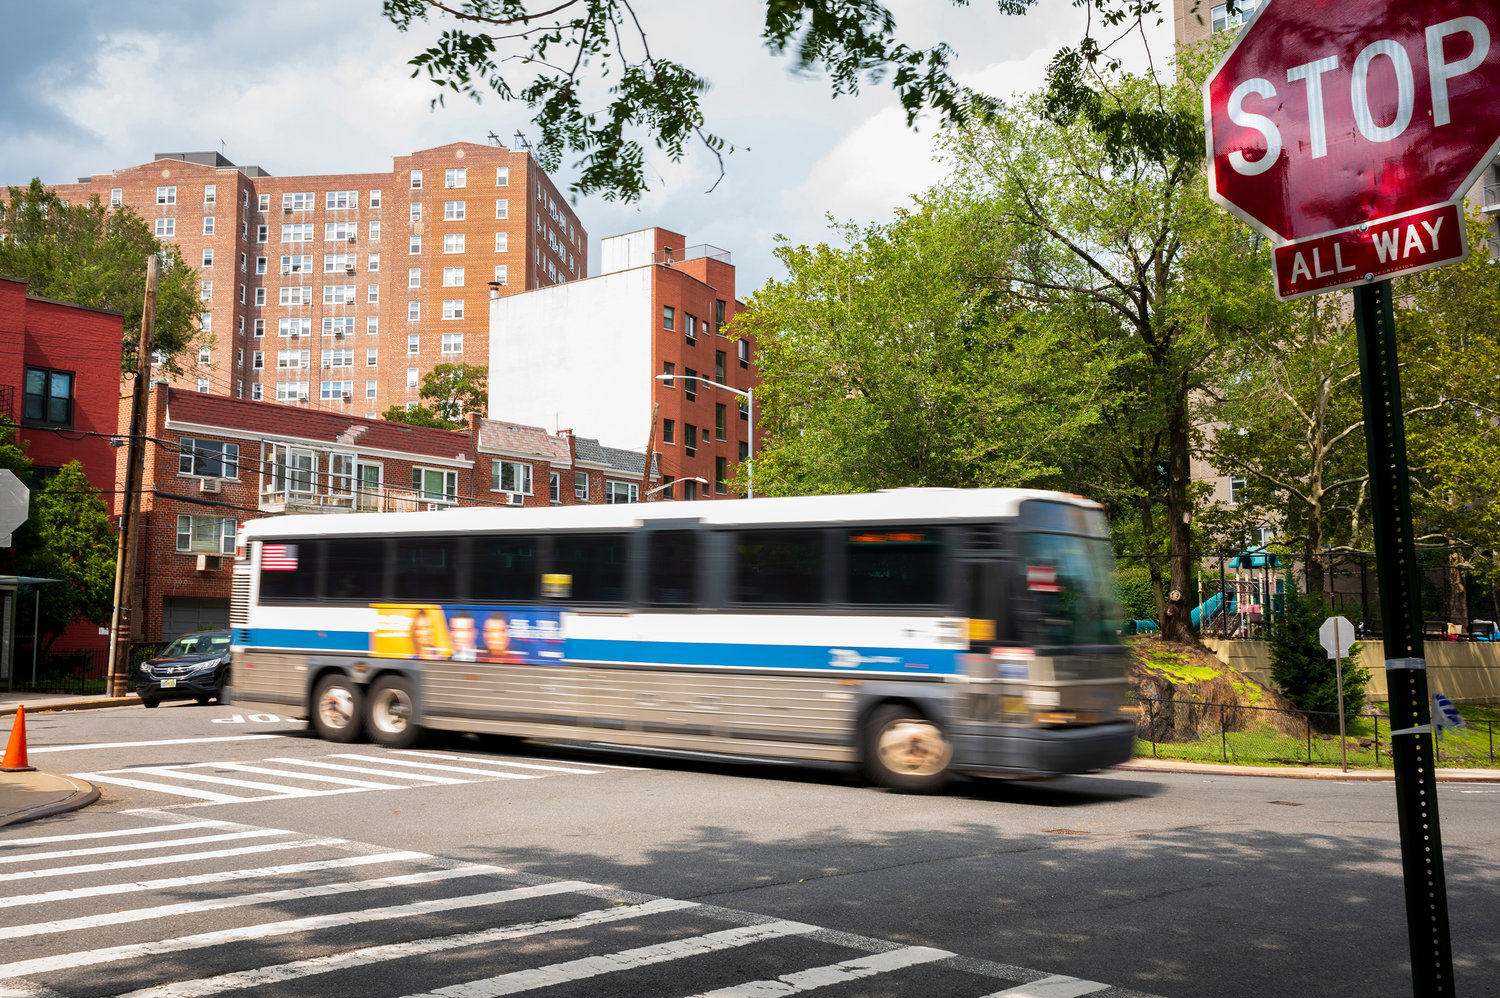 An MTA express bus shoots around the corner at the intersection of Kappock Street and Johnson Avenue, the Spuyten Duyvil intersection where political activist Ruth Mullen was killed last September. Lawmakers have since pushed for the city’s transportation department to install a traffic light, and make other safety improvements there.